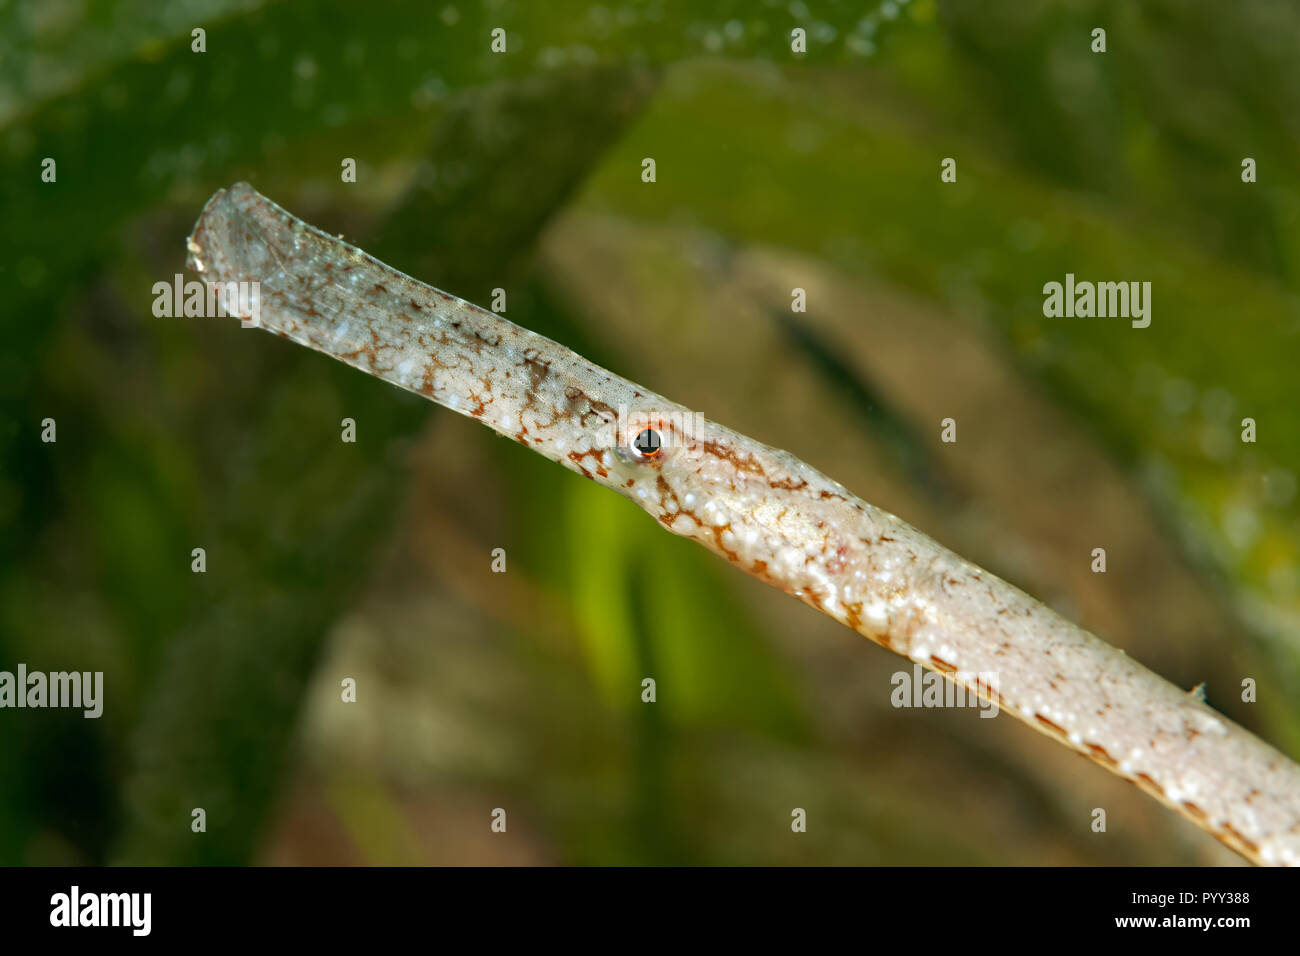 Broadnosed pipefish (Syngnathus typhle), Mediterranean Sea, Southern Cyprus, Cyprus Stock Photo